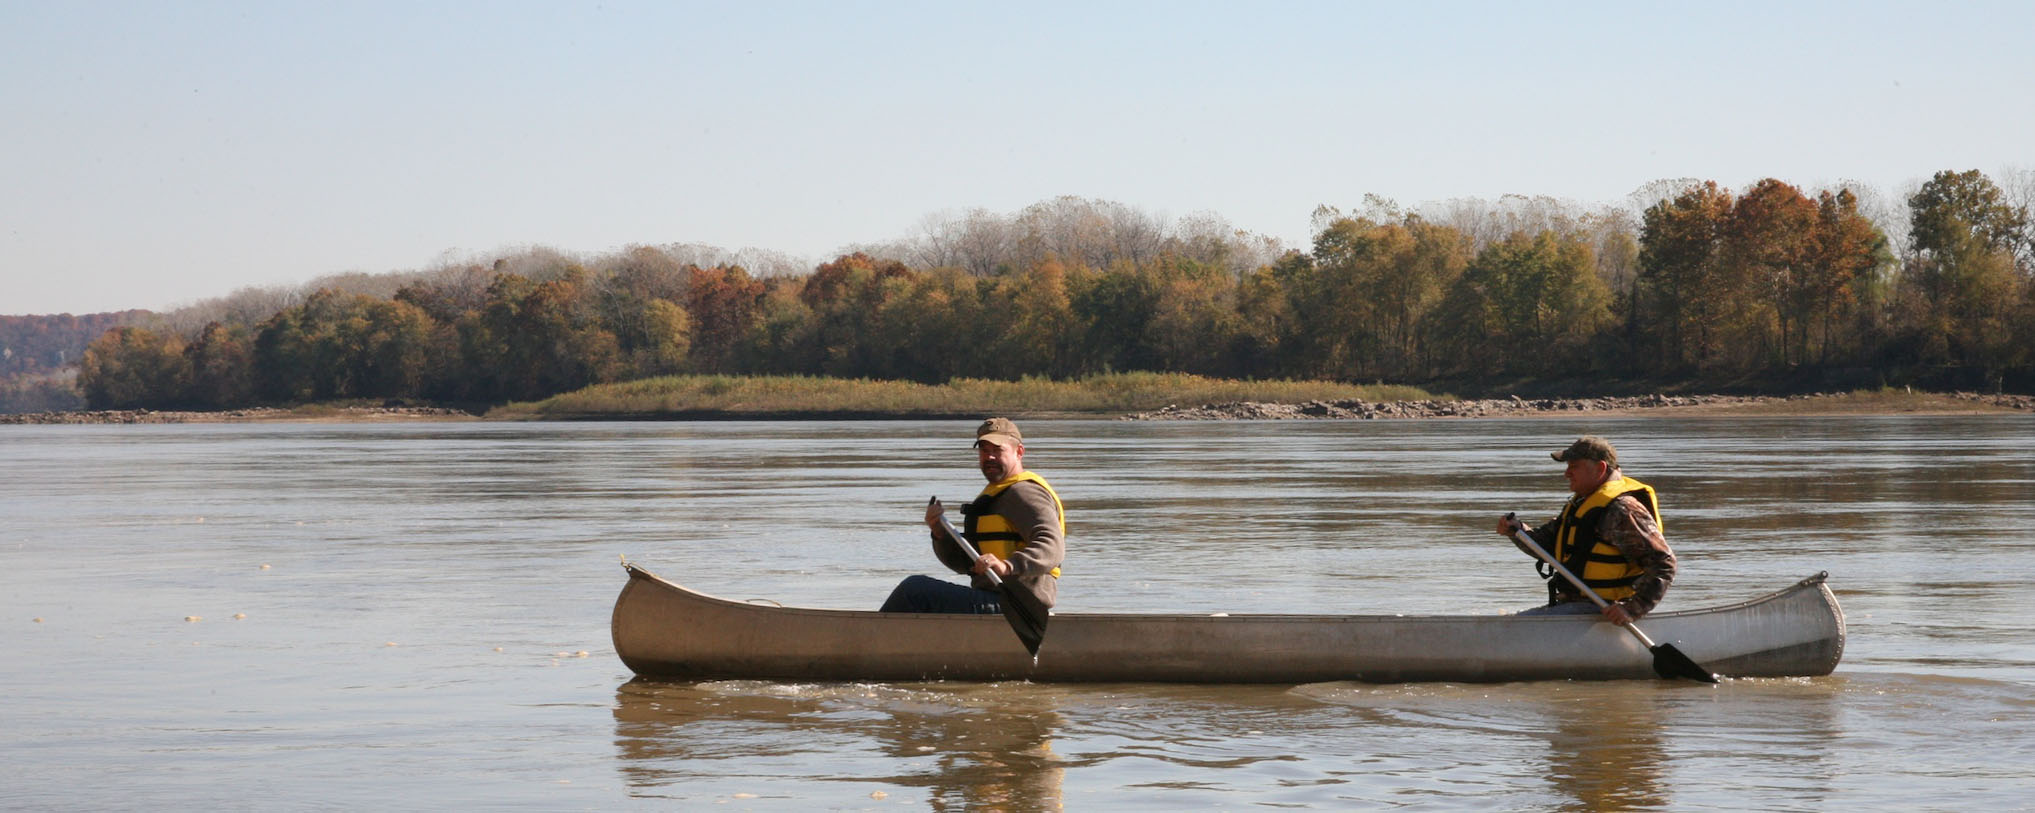 Canoe the Missouri River with Missouri River Excursions